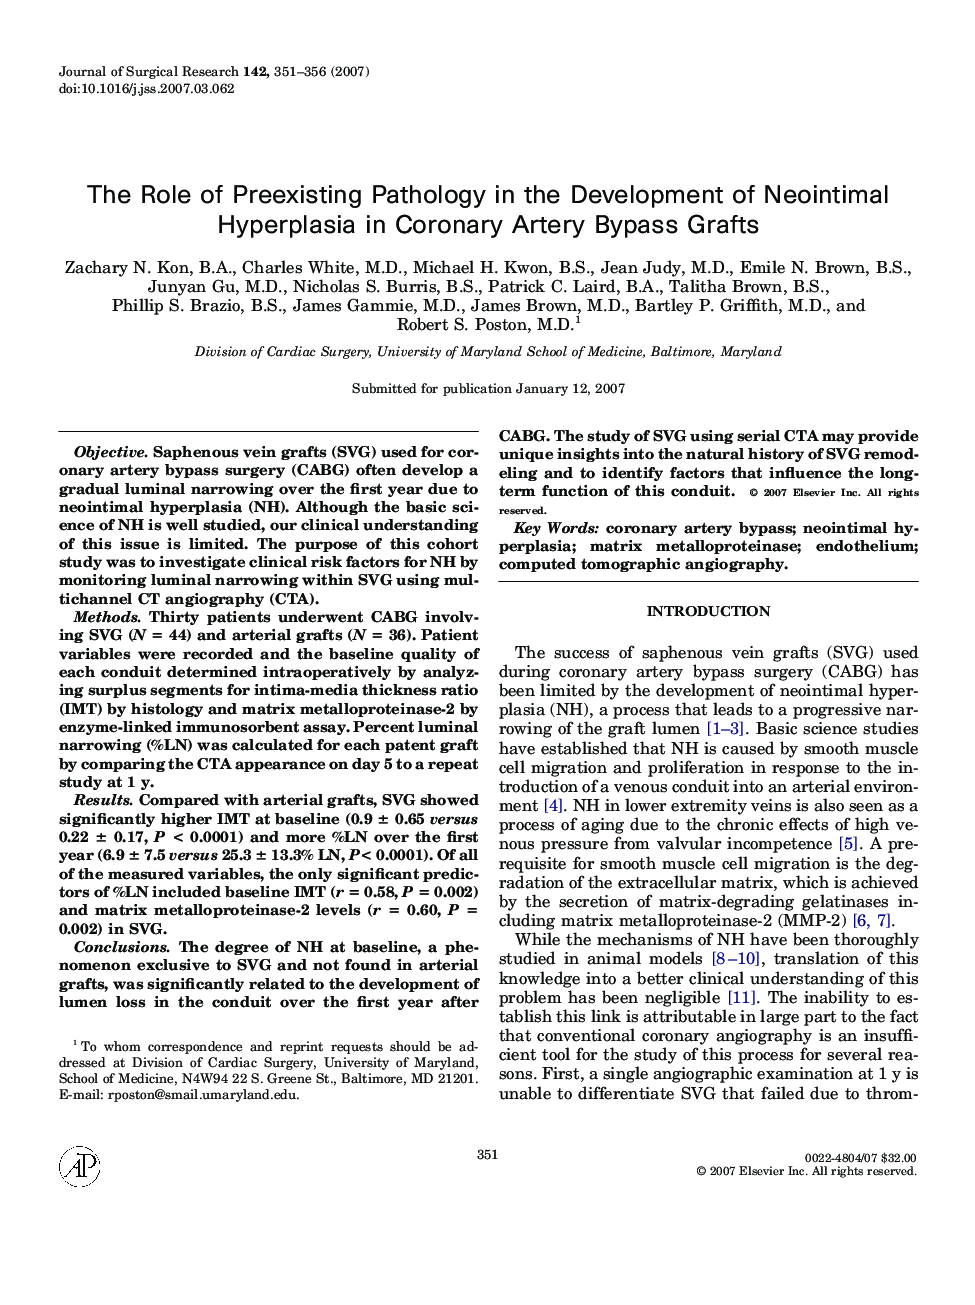 The Role of Preexisting Pathology in the Development of Neointimal Hyperplasia in Coronary Artery Bypass Grafts